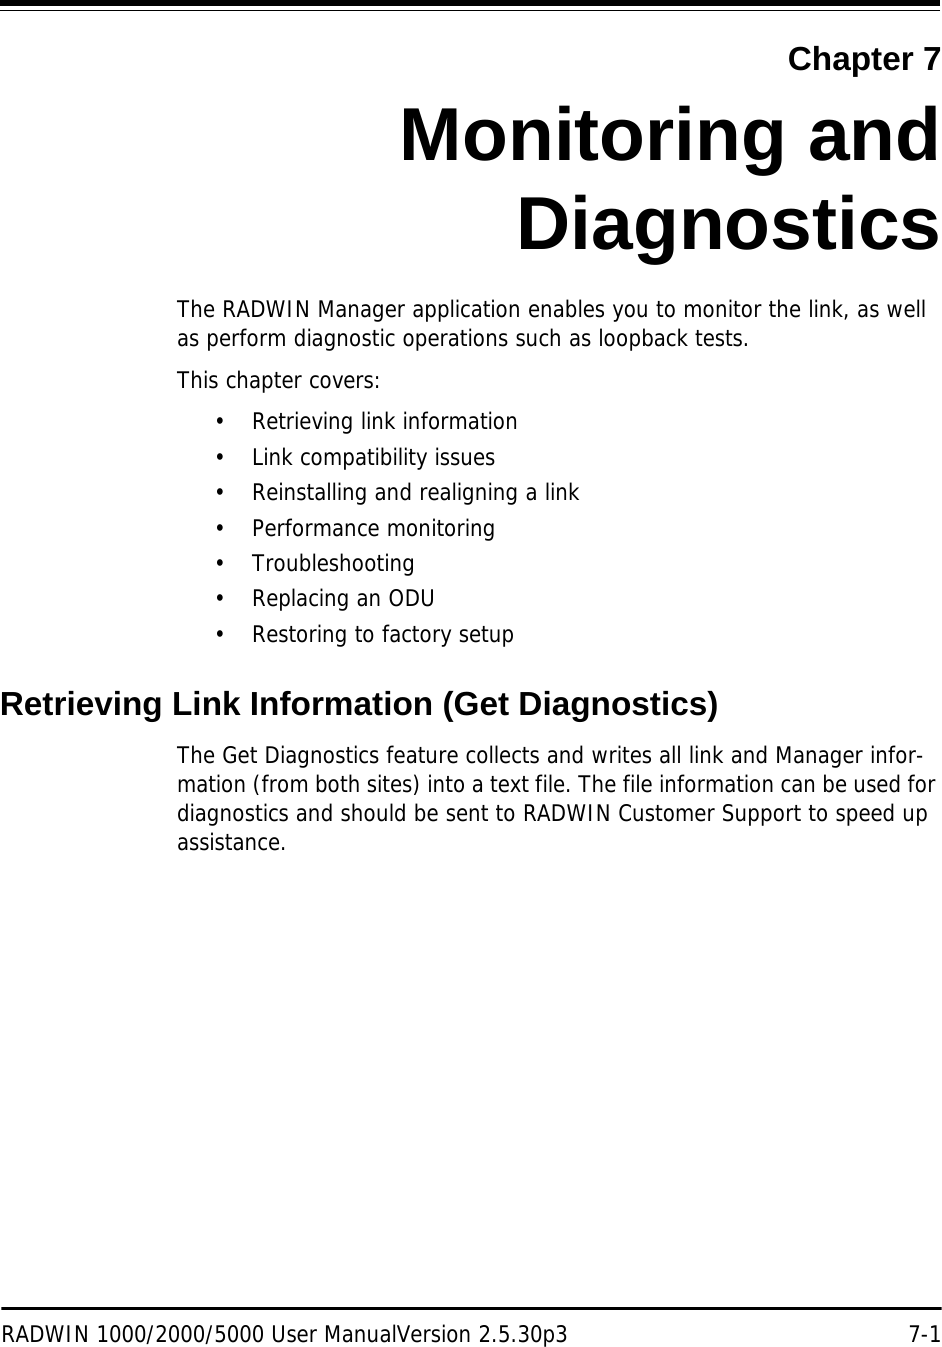 RADWIN 1000/2000/5000 User ManualVersion 2.5.30p3 7-1Chapter 7Monitoring andDiagnosticsThe RADWIN Manager application enables you to monitor the link, as well as perform diagnostic operations such as loopback tests. This chapter covers:• Retrieving link information• Link compatibility issues• Reinstalling and realigning a link• Performance monitoring• Troubleshooting• Replacing an ODU• Restoring to factory setupRetrieving Link Information (Get Diagnostics)The Get Diagnostics feature collects and writes all link and Manager infor-mation (from both sites) into a text file. The file information can be used for diagnostics and should be sent to RADWIN Customer Support to speed up assistance.